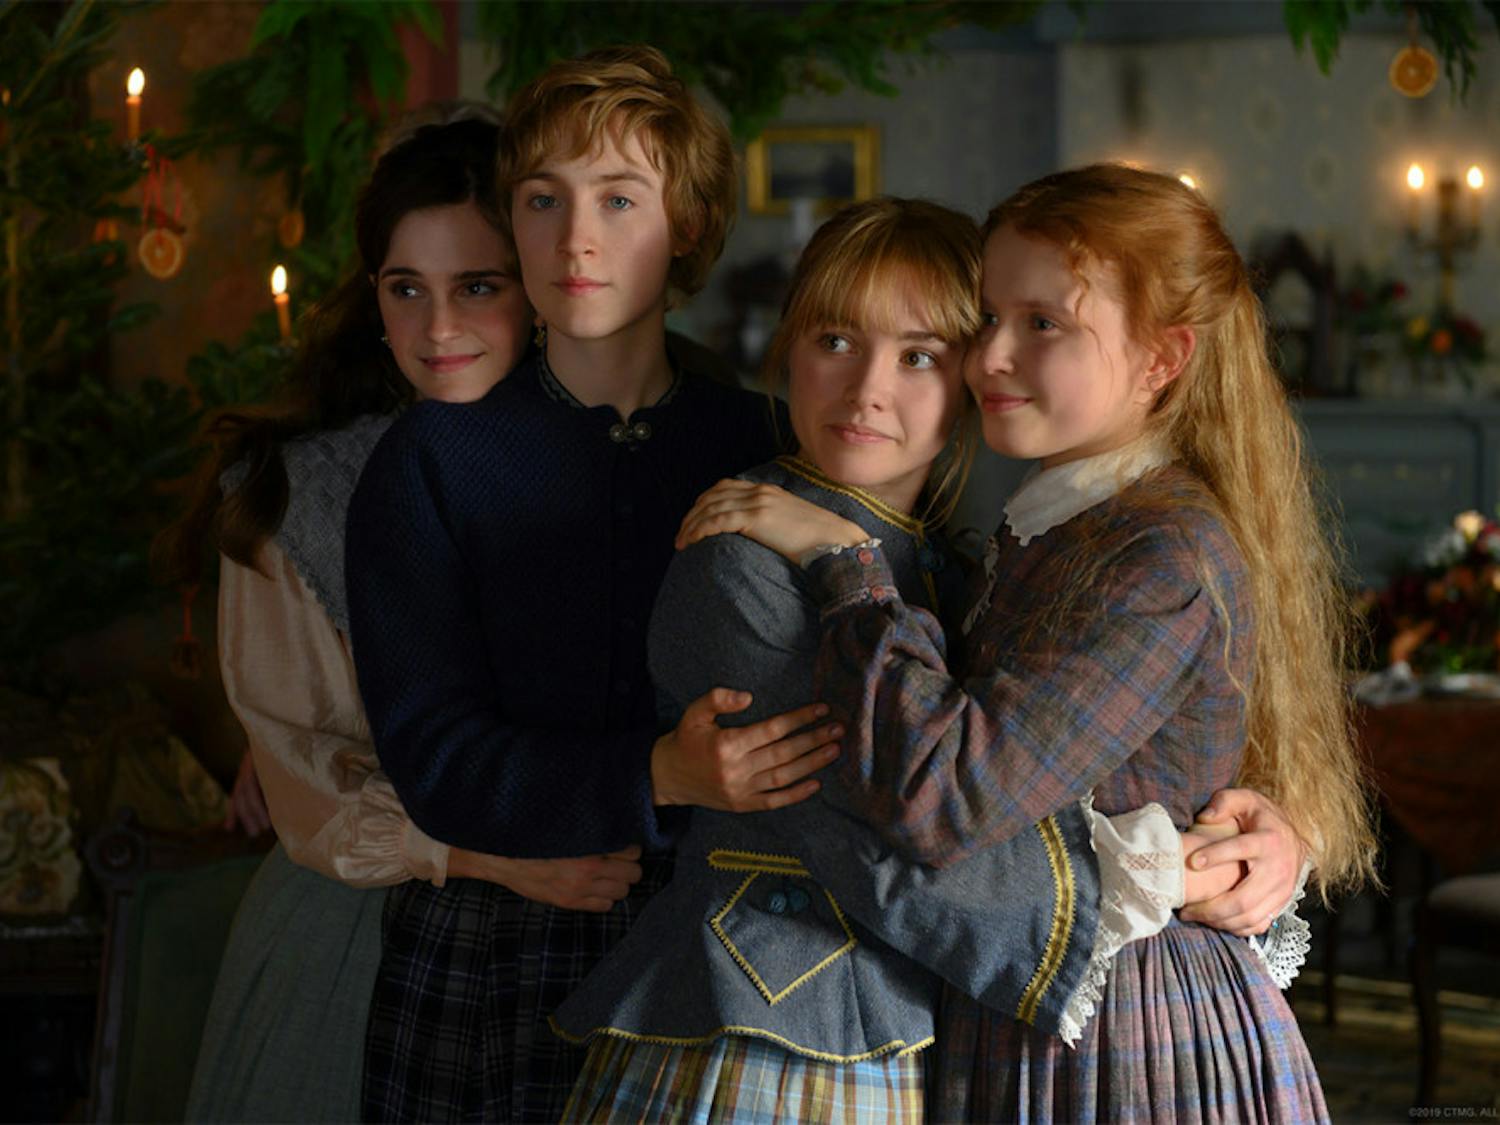 Greta Gerwig's "Little Women" is one of the films competing for Best Picture at the upcoming 92nd Academy Awards. Soairse Ronan, who plays Jo March, is also nominated for Actress in a Leading Role. 